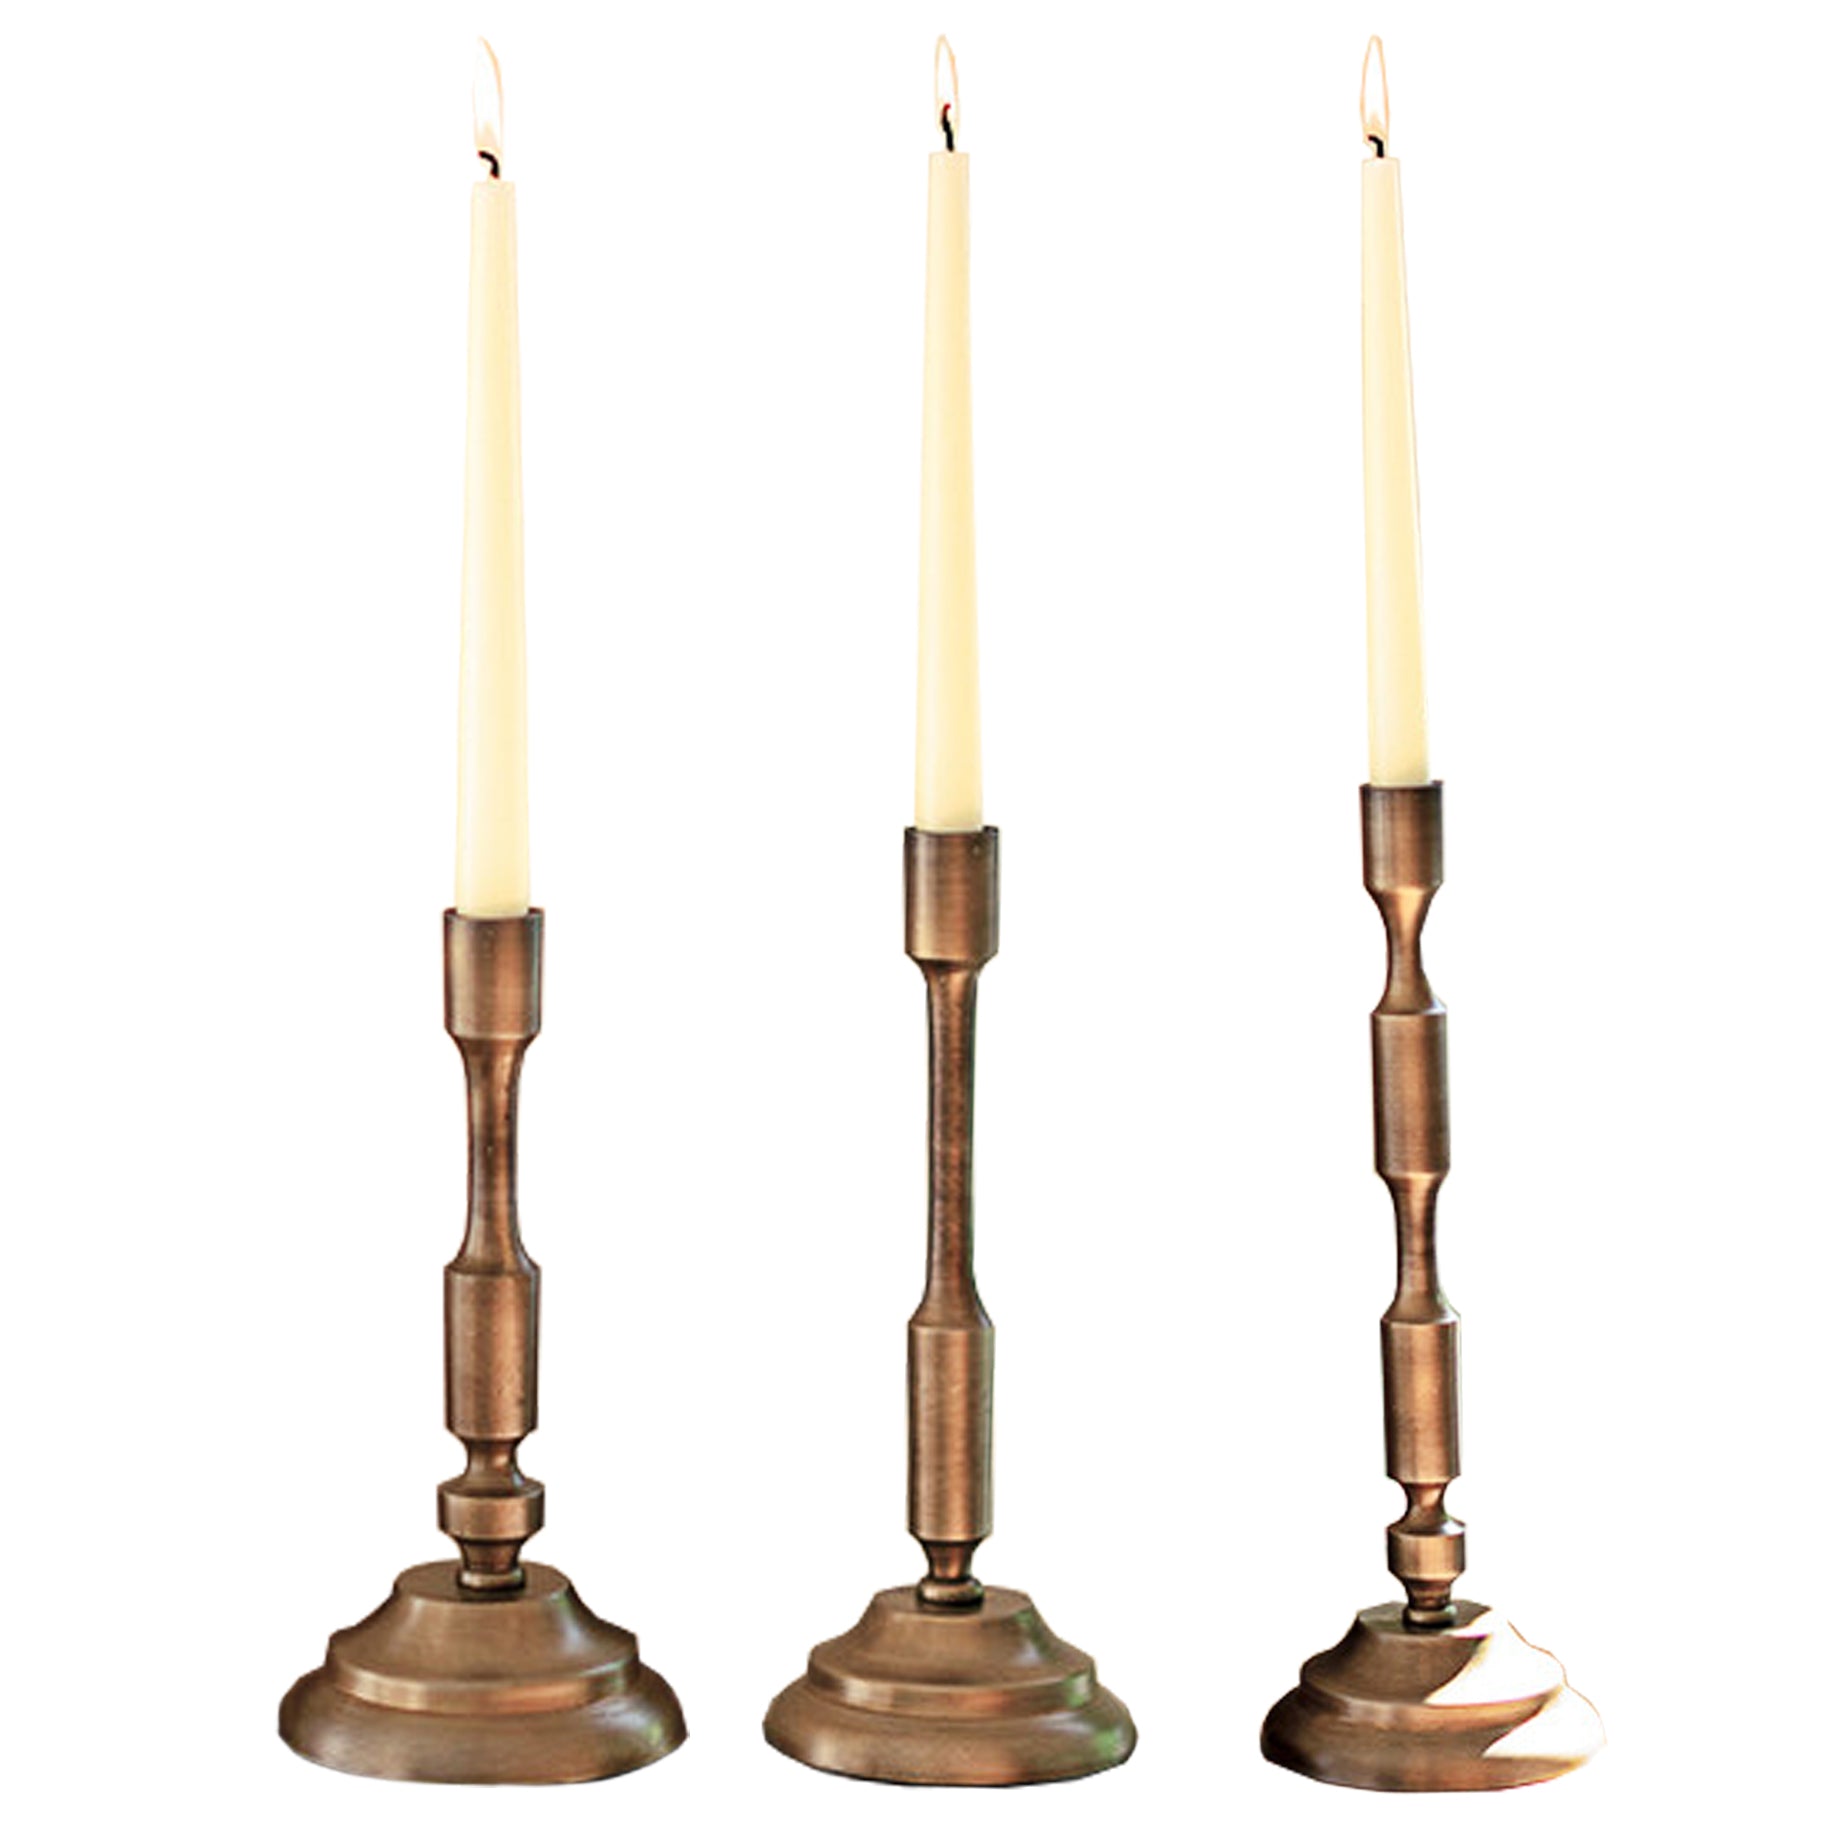 Antique Brass Metal Taper Candle Stands -Set Of 3